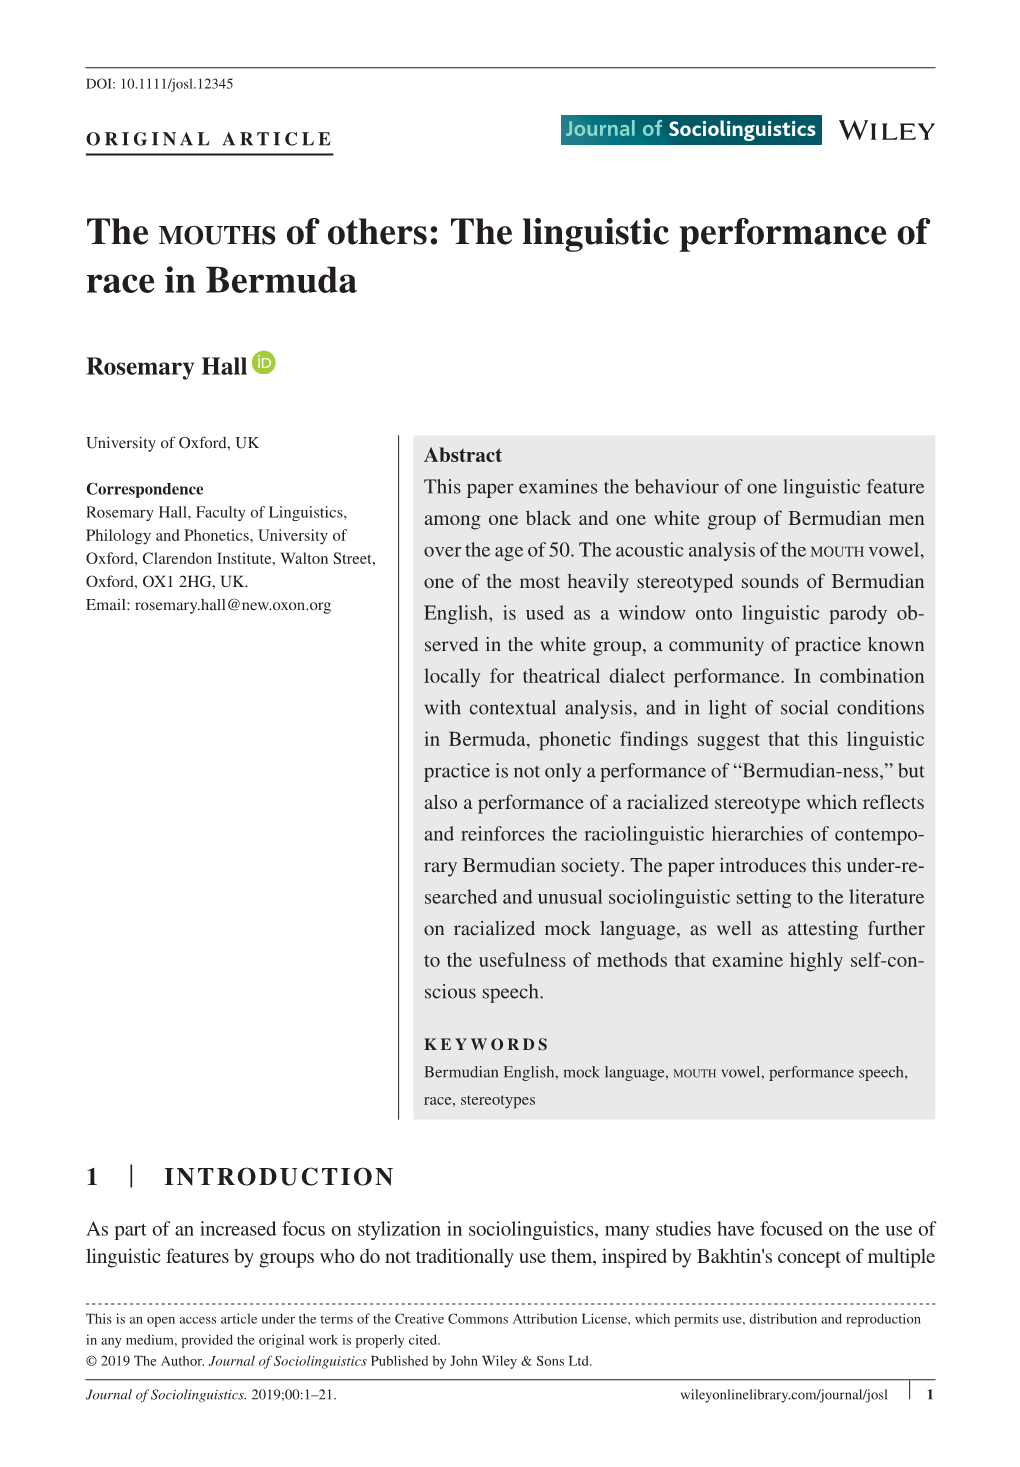 The Linguistic Performance of Race in Bermuda